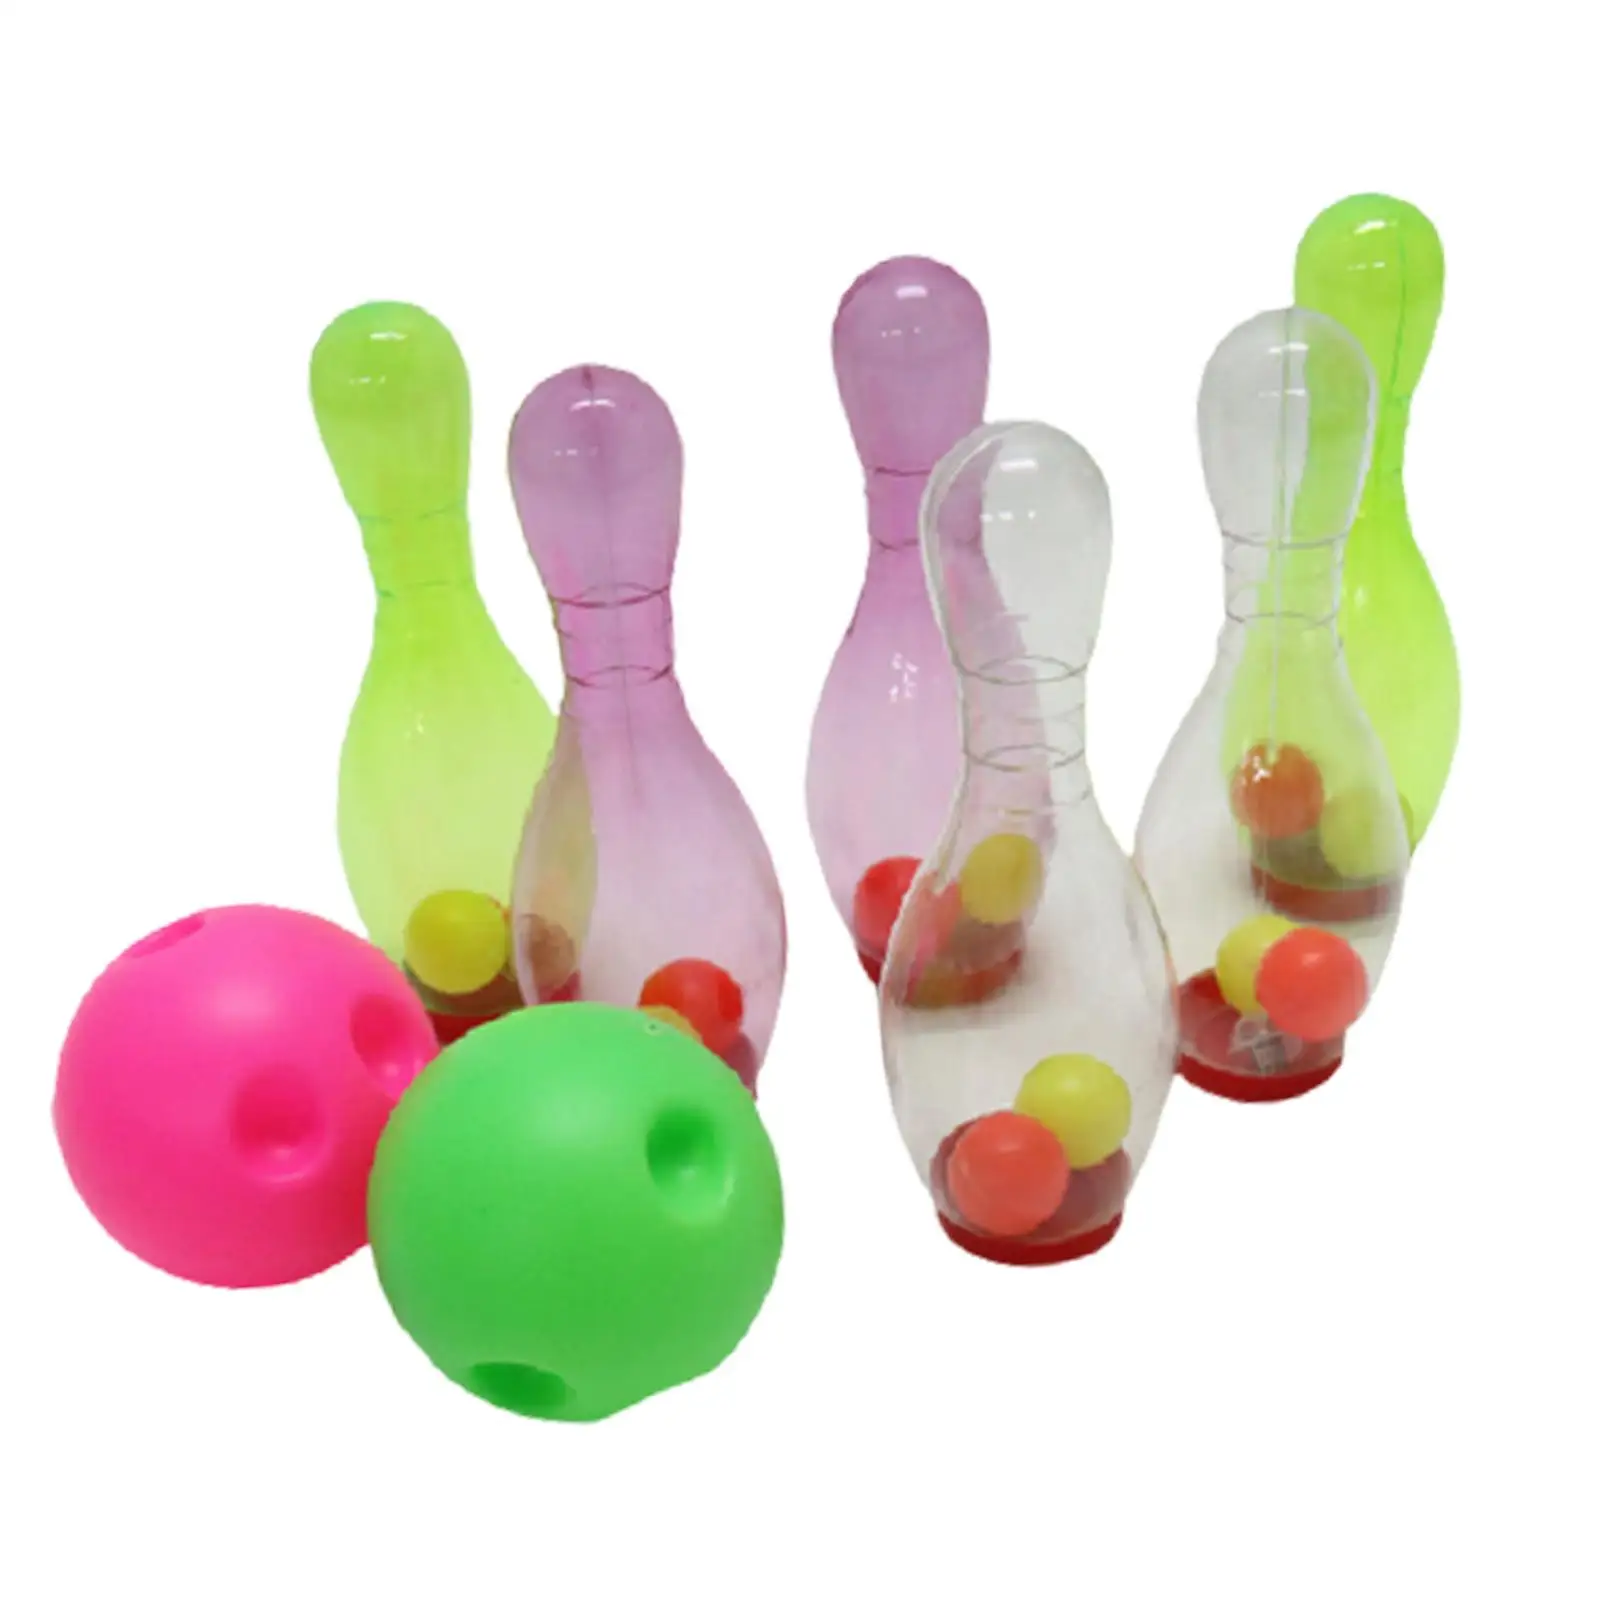 LED Bowling Set Light up Motor Skills Includes 6 Bowling Pins and 2 Ball for Family Activity Birthday Gifts Child Lawn Games